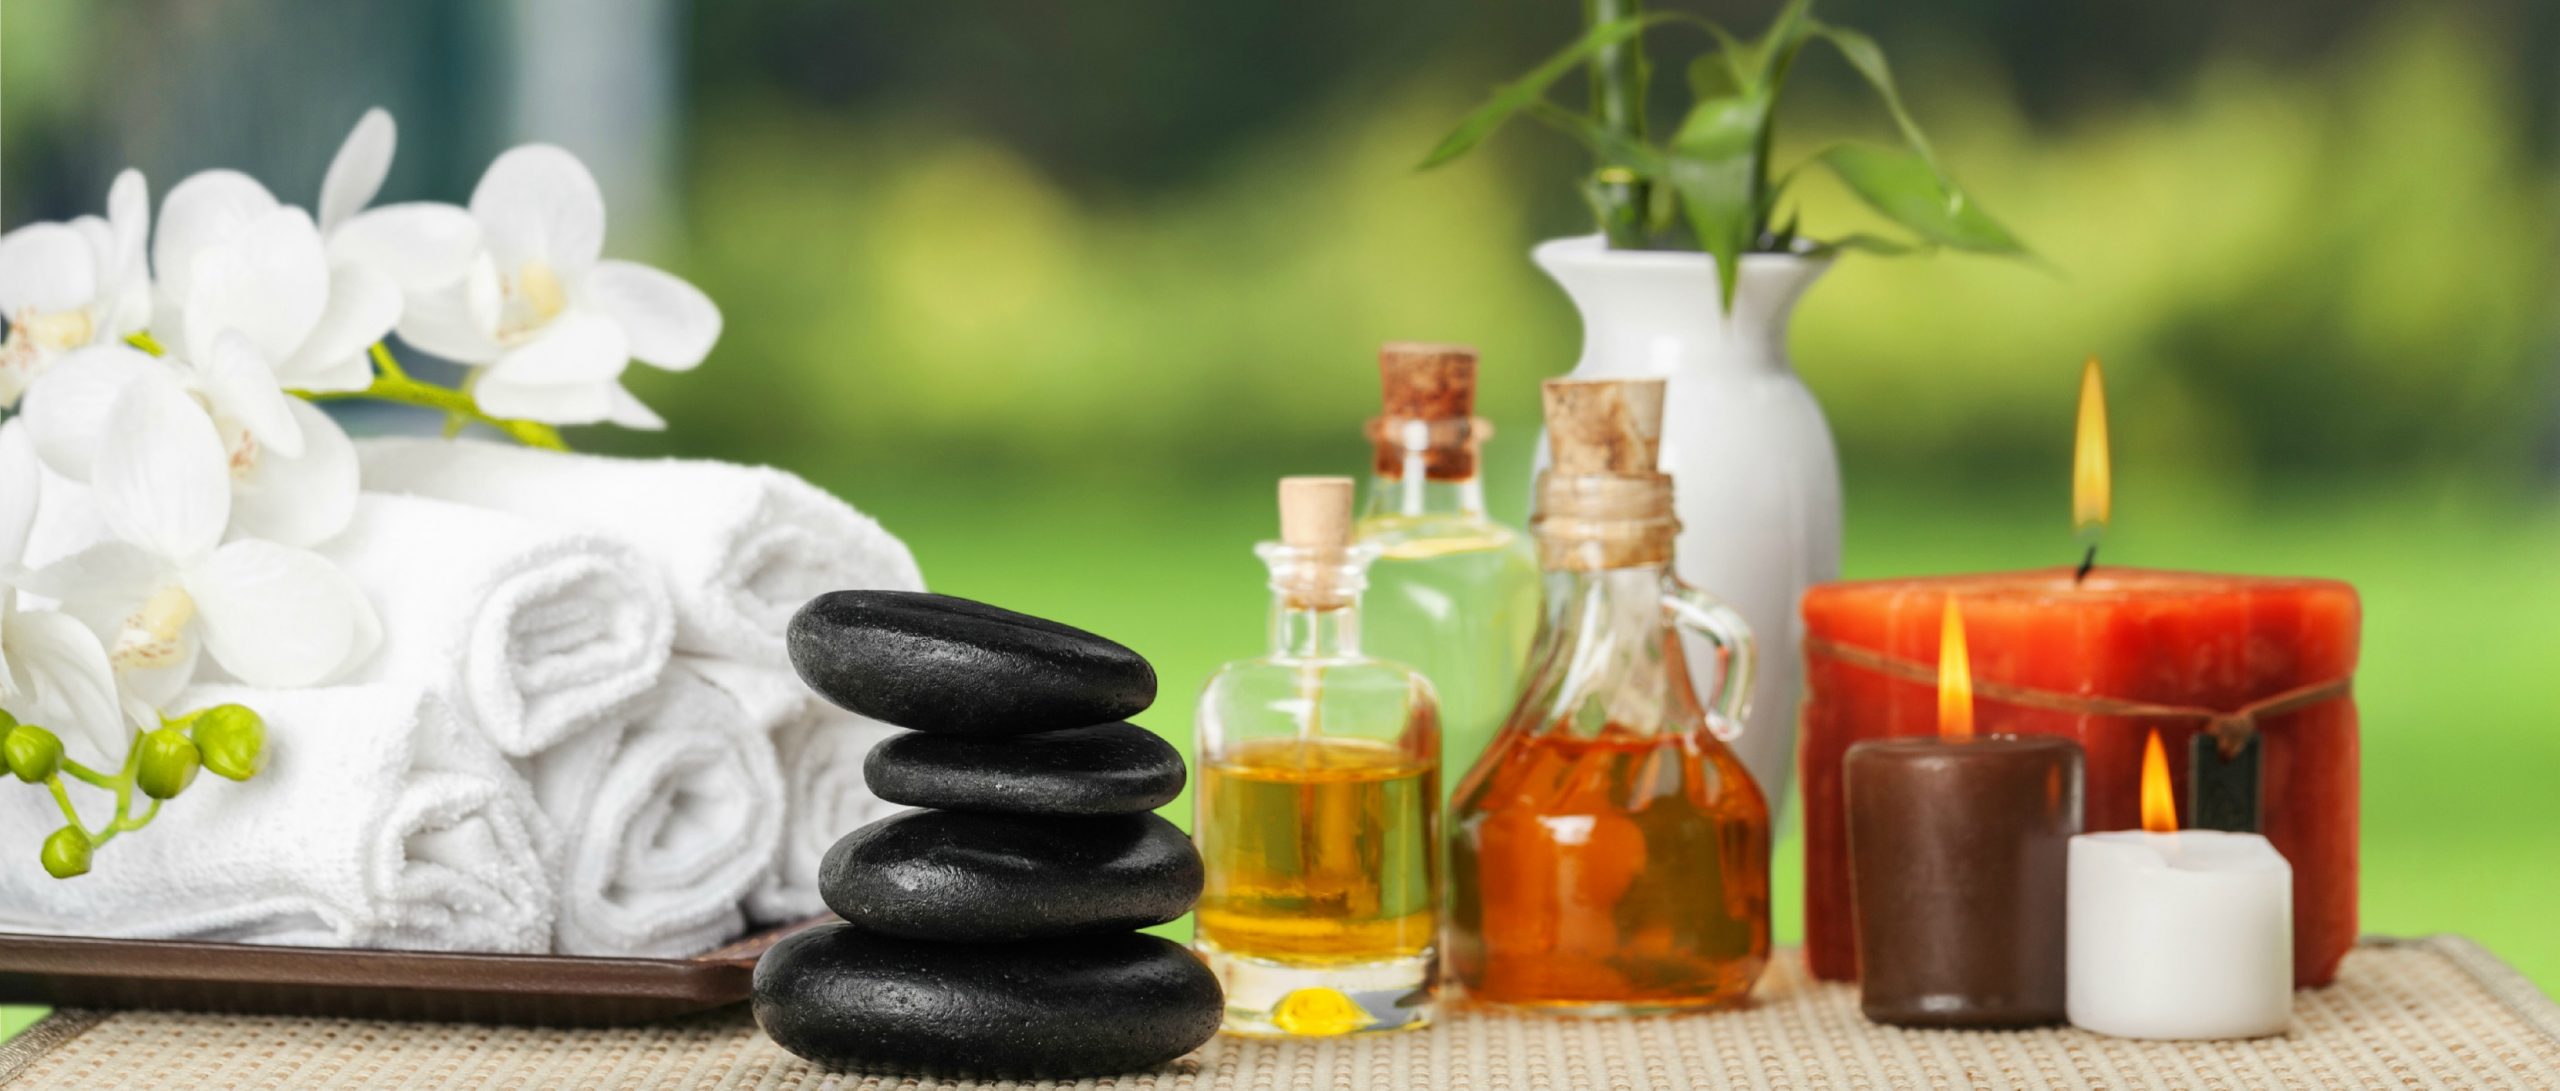 Making A Massage Enjoyable - How You Can Prepare For Every Massage